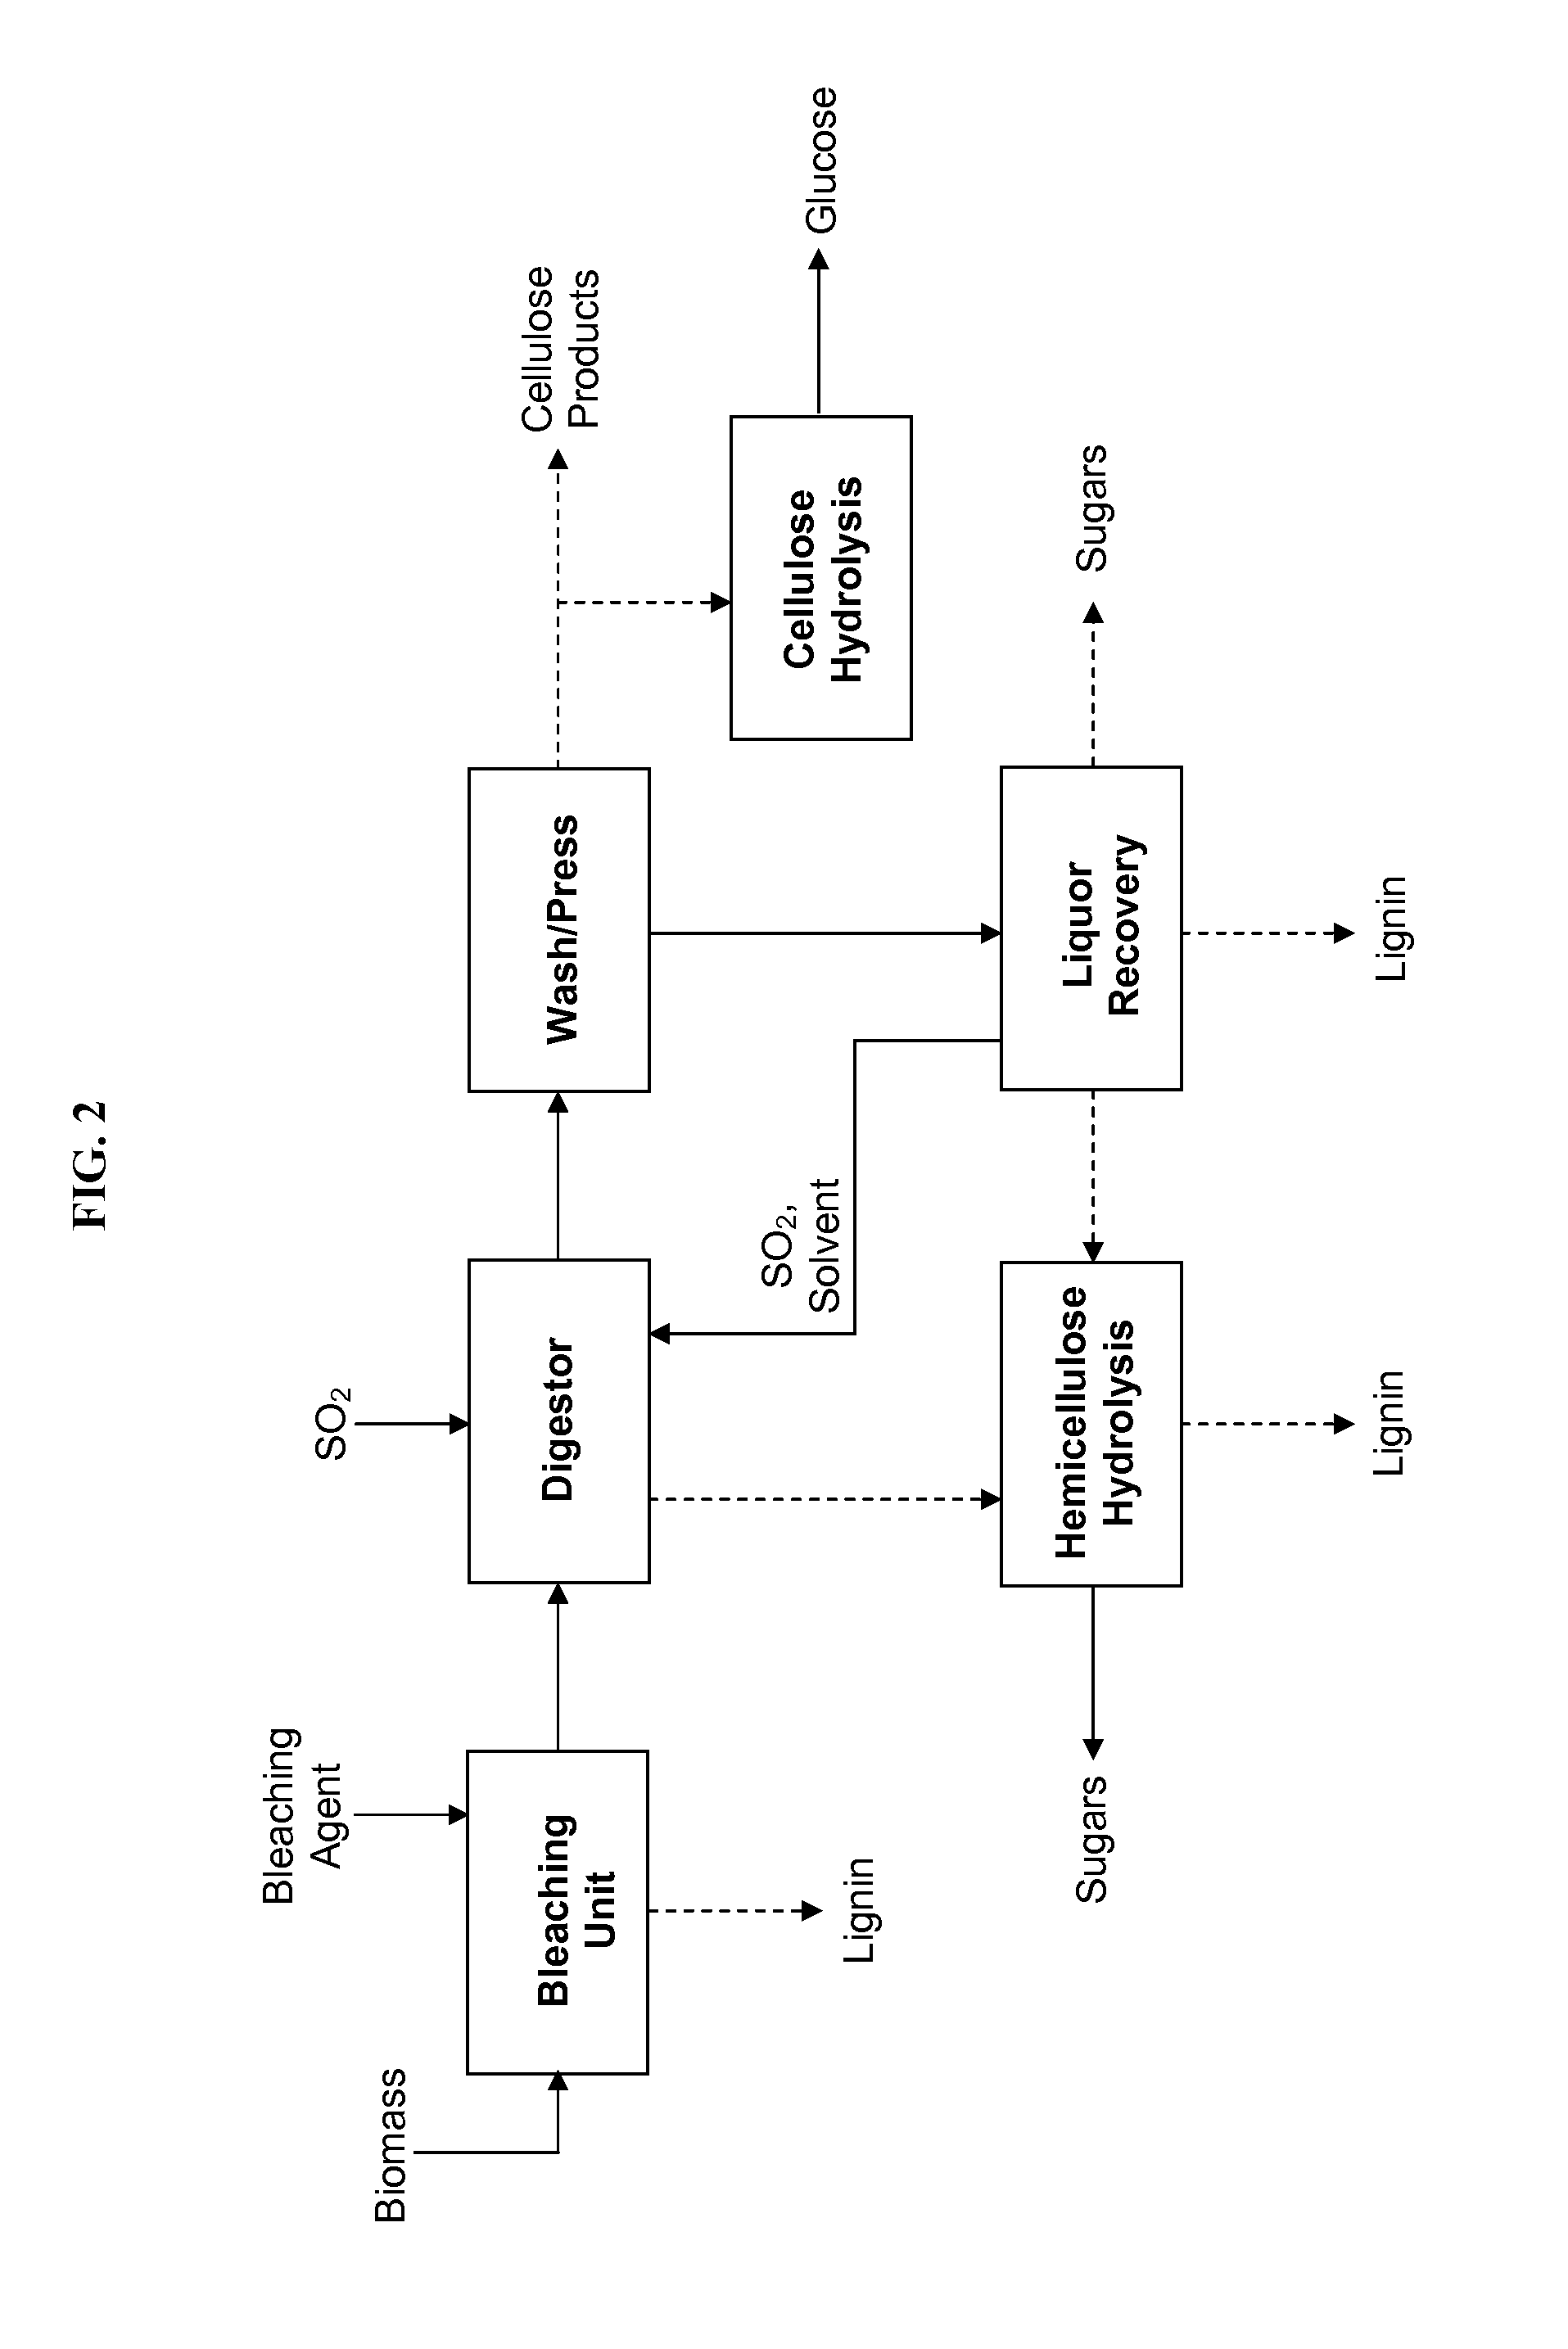 Processes for making cellulose with very low lignin content for glucose, high-purity cellulose, or cellulose derivatives